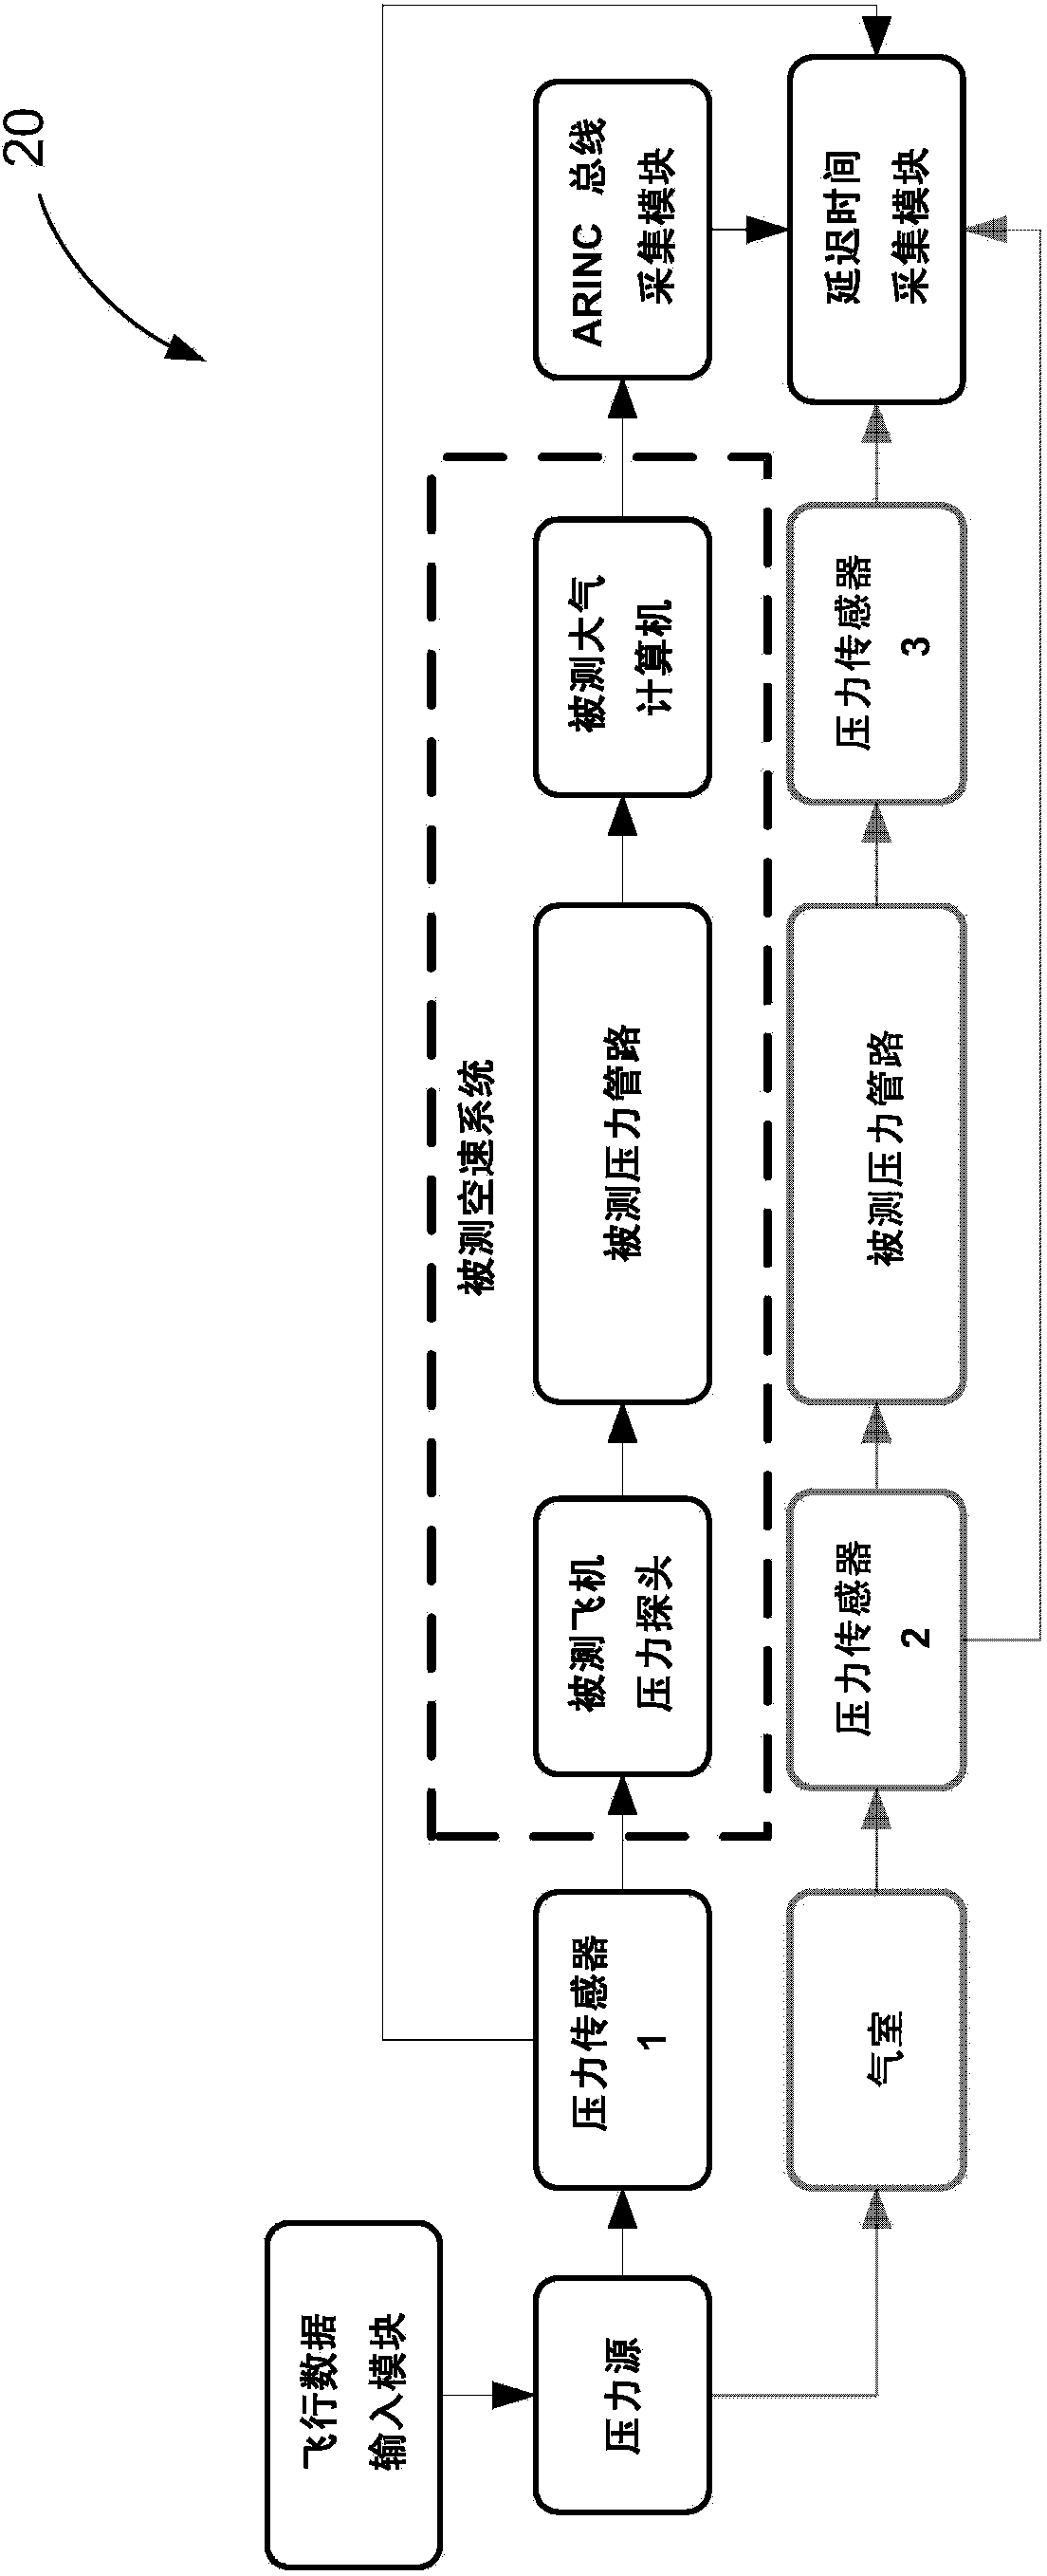 Measuring device for lag time of airplane airspeed system